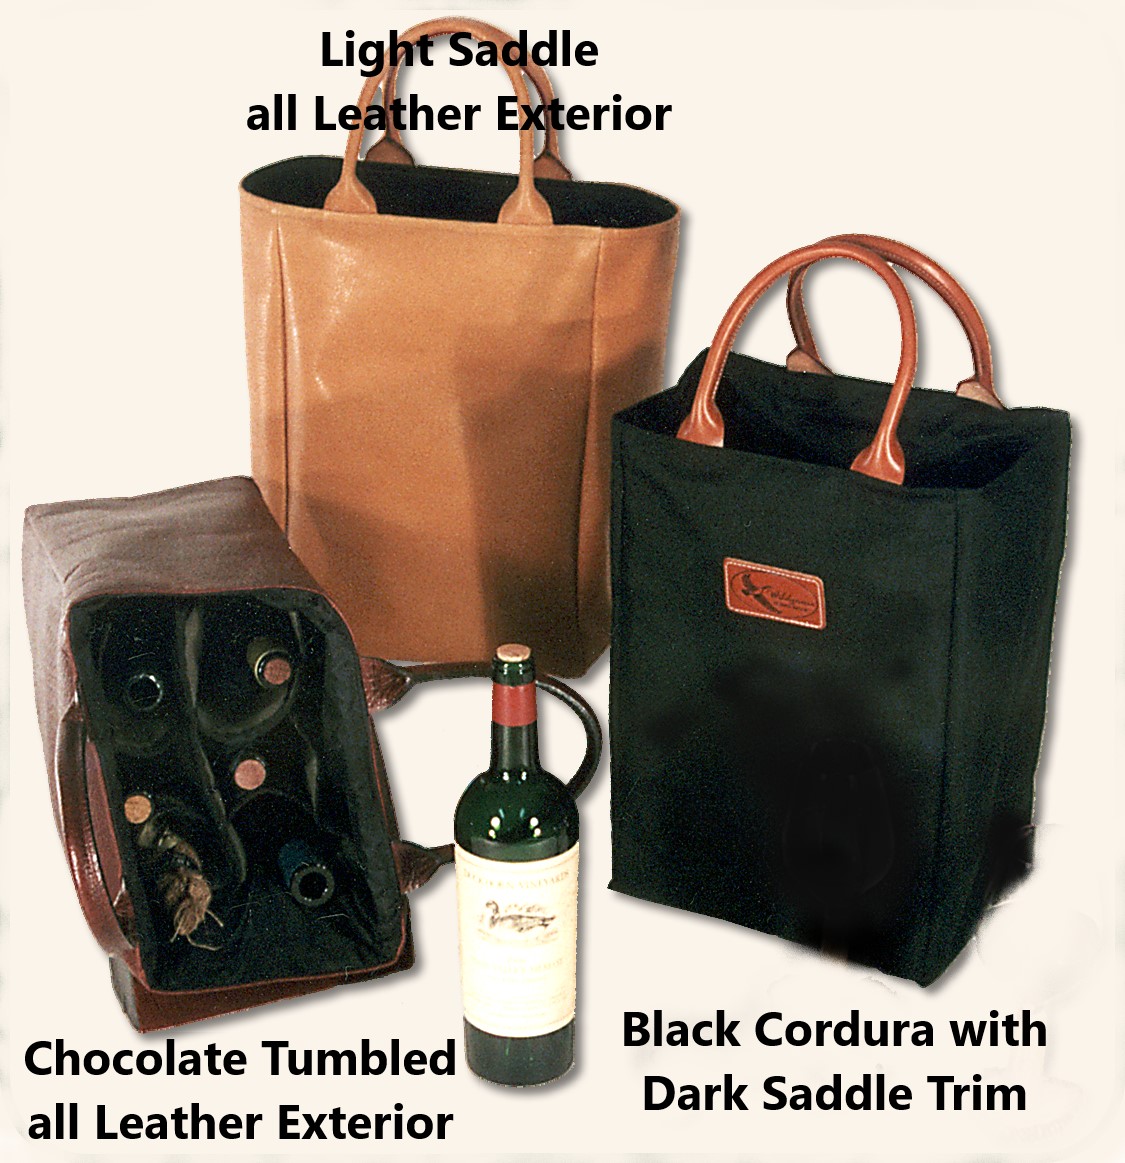 6 Bottle Wine Bag with Zipper and Rolled Leather Handles